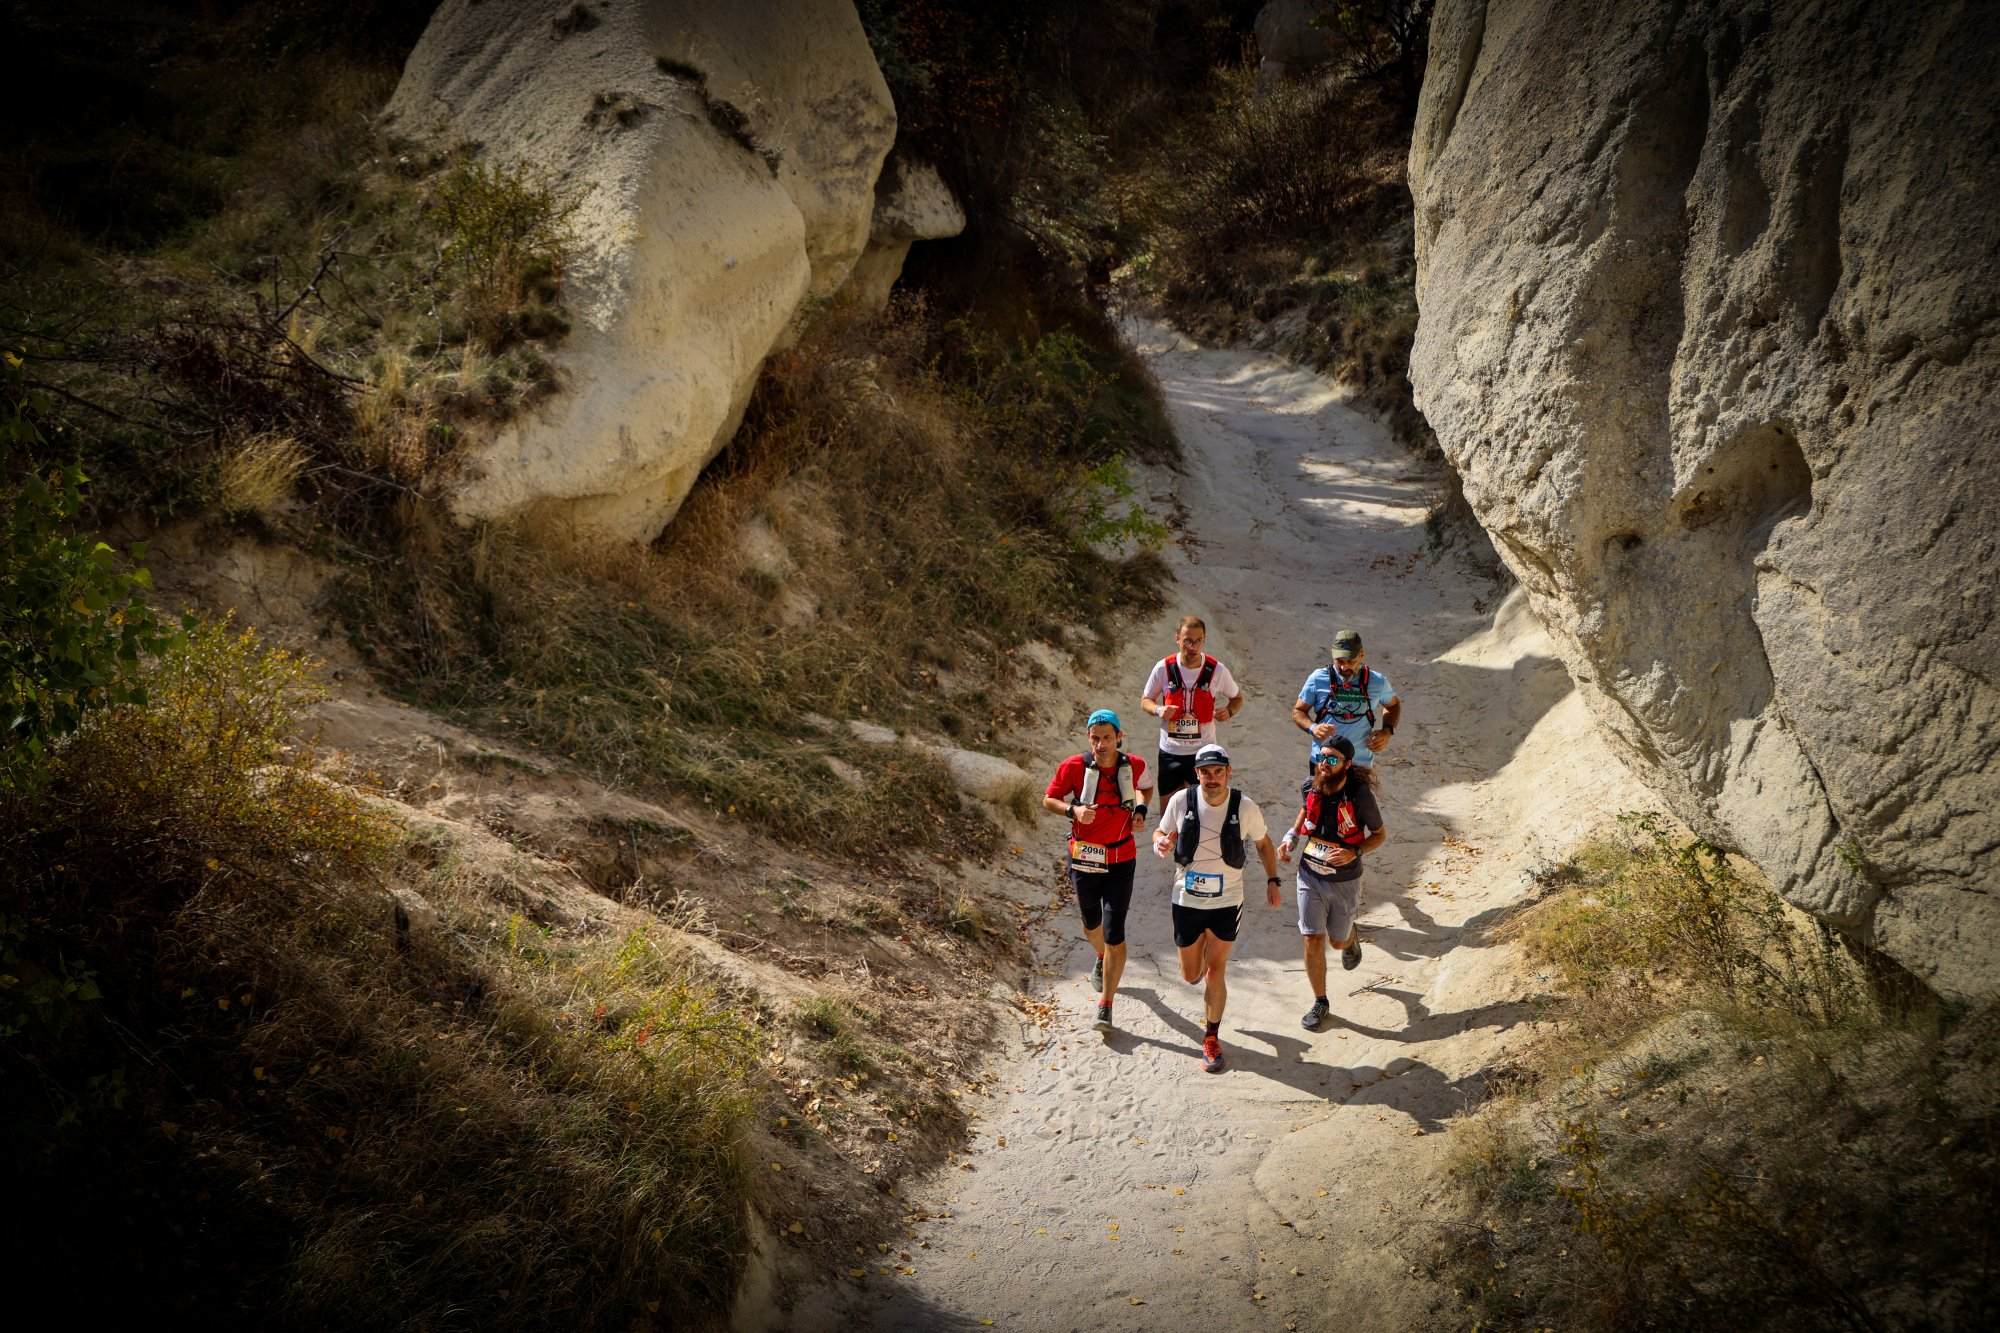 A group of people engaged in ultrarunning on a trail through a rocky area, learning important lessons along the way.